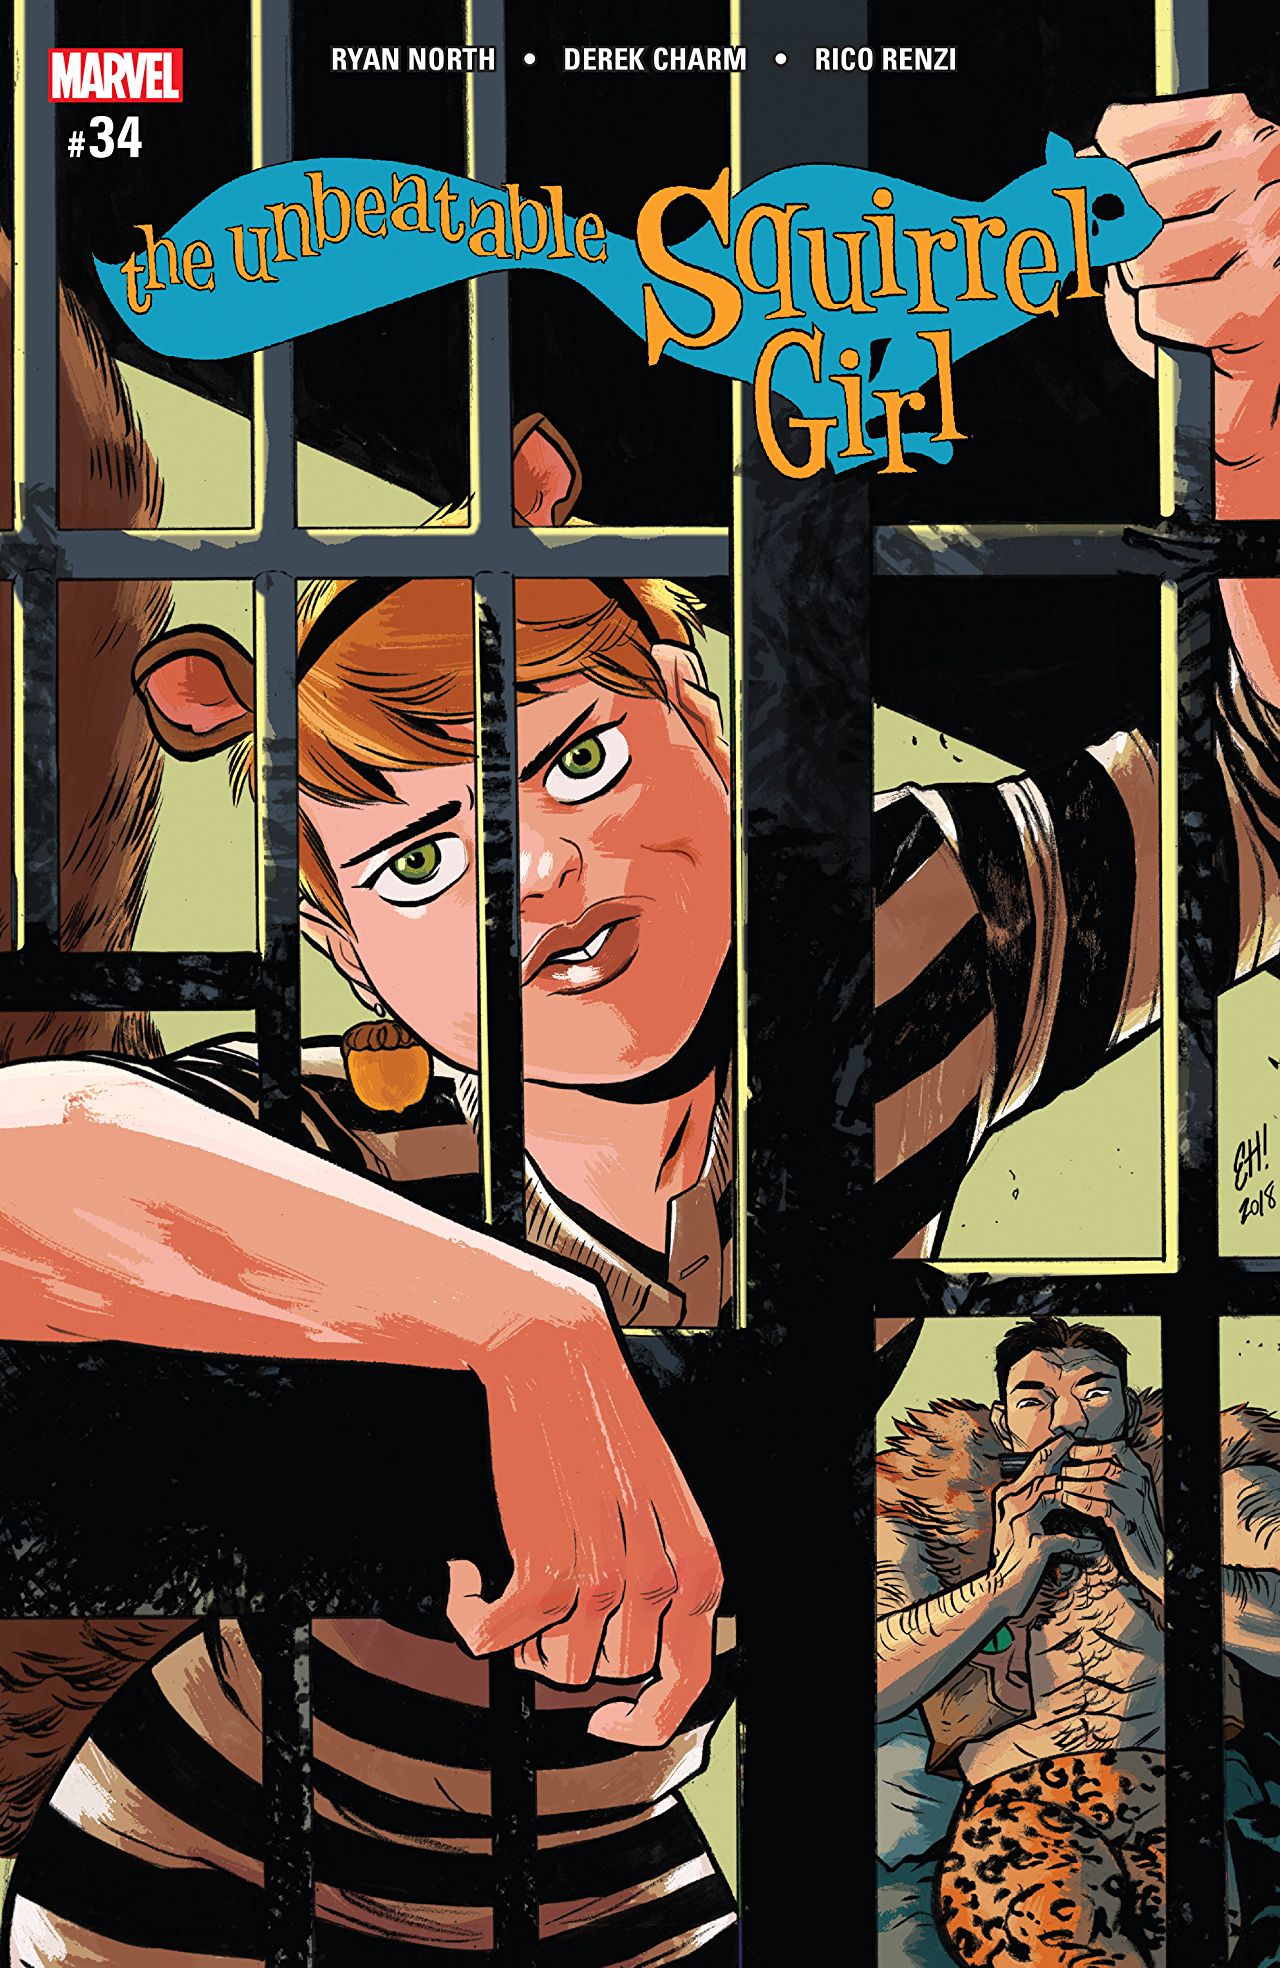 The Unbeatable Squirrel Girl #34 Review